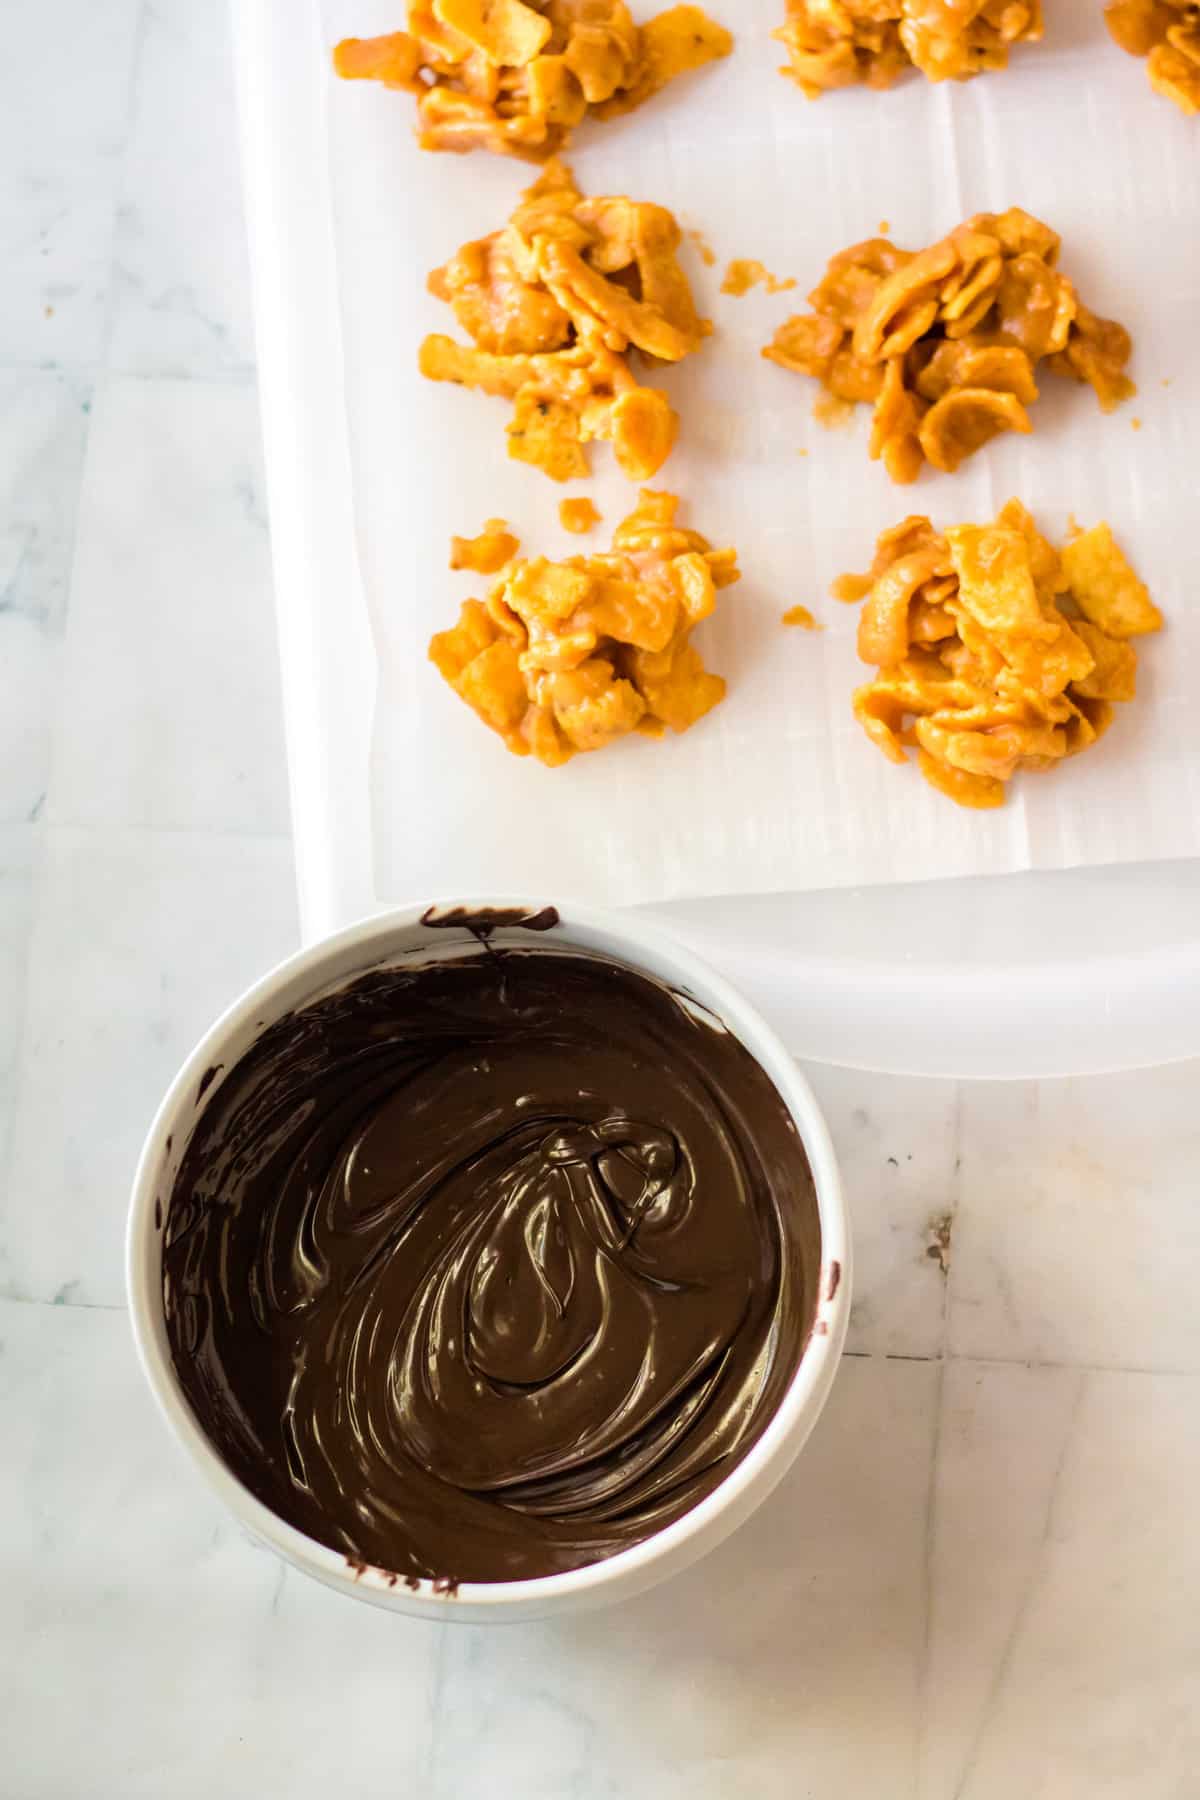 Bowl of melted chocolate next to fritos candy clusters.